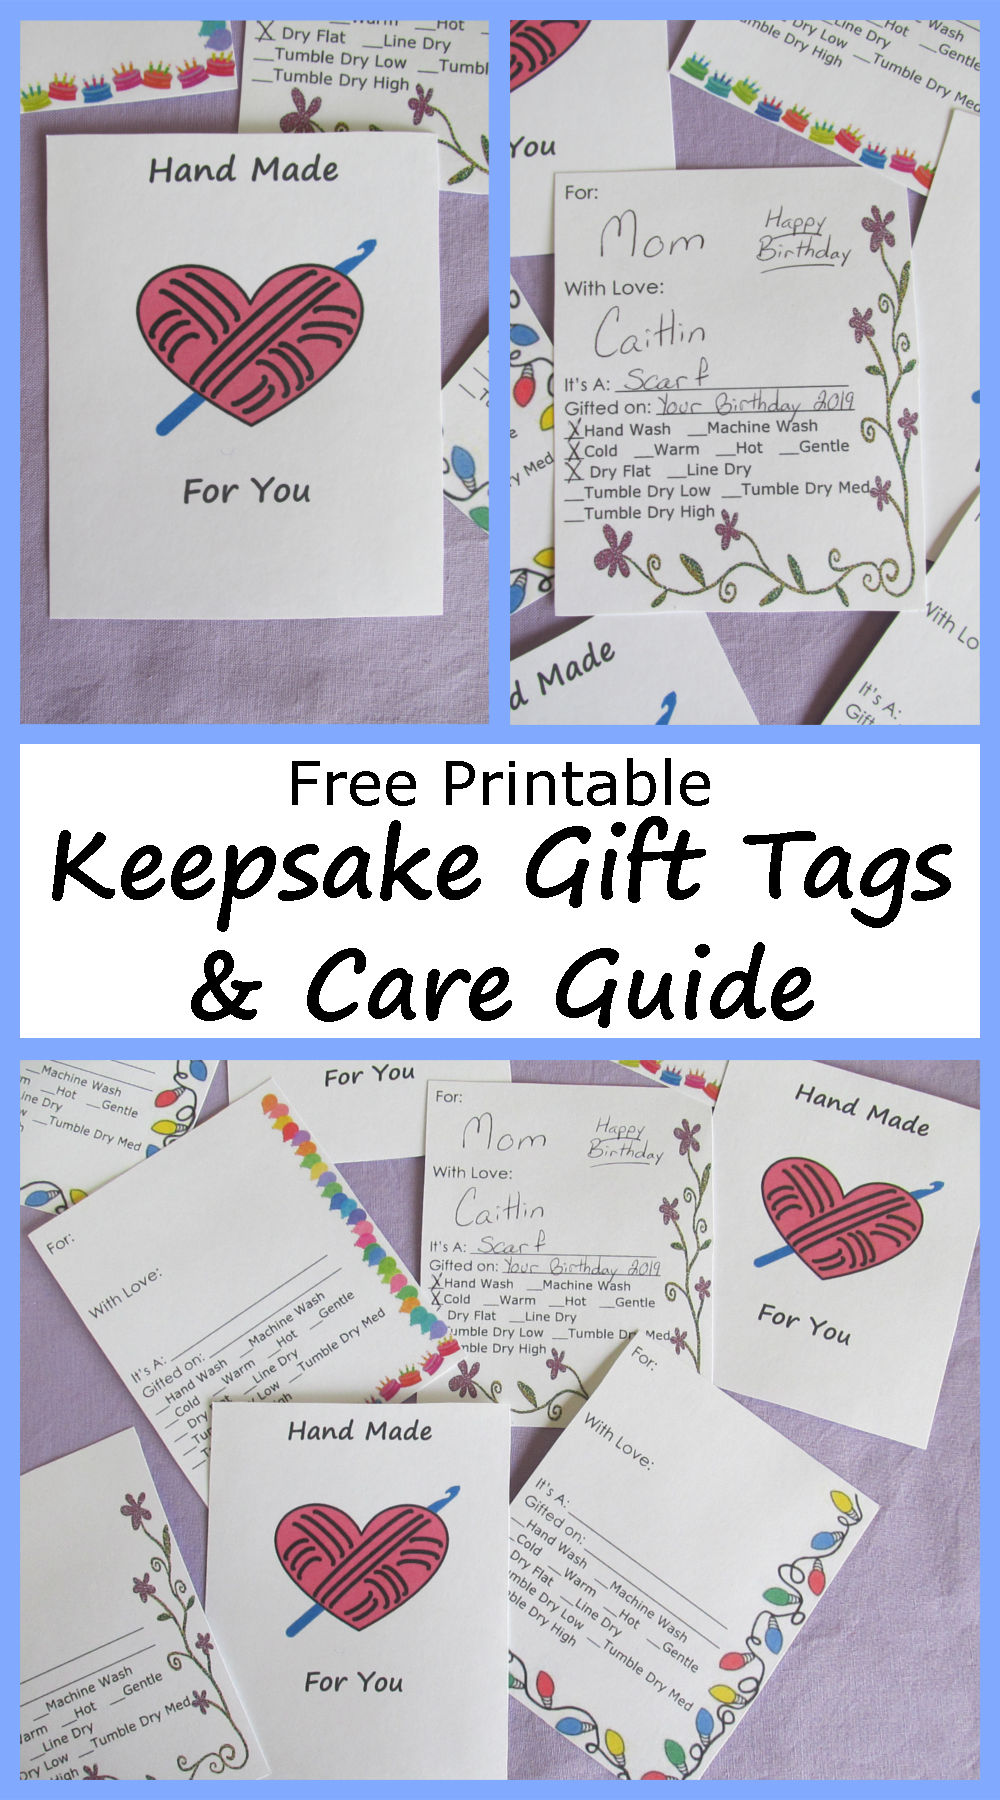 Keepsake Gift Tags and Gift Care Guide